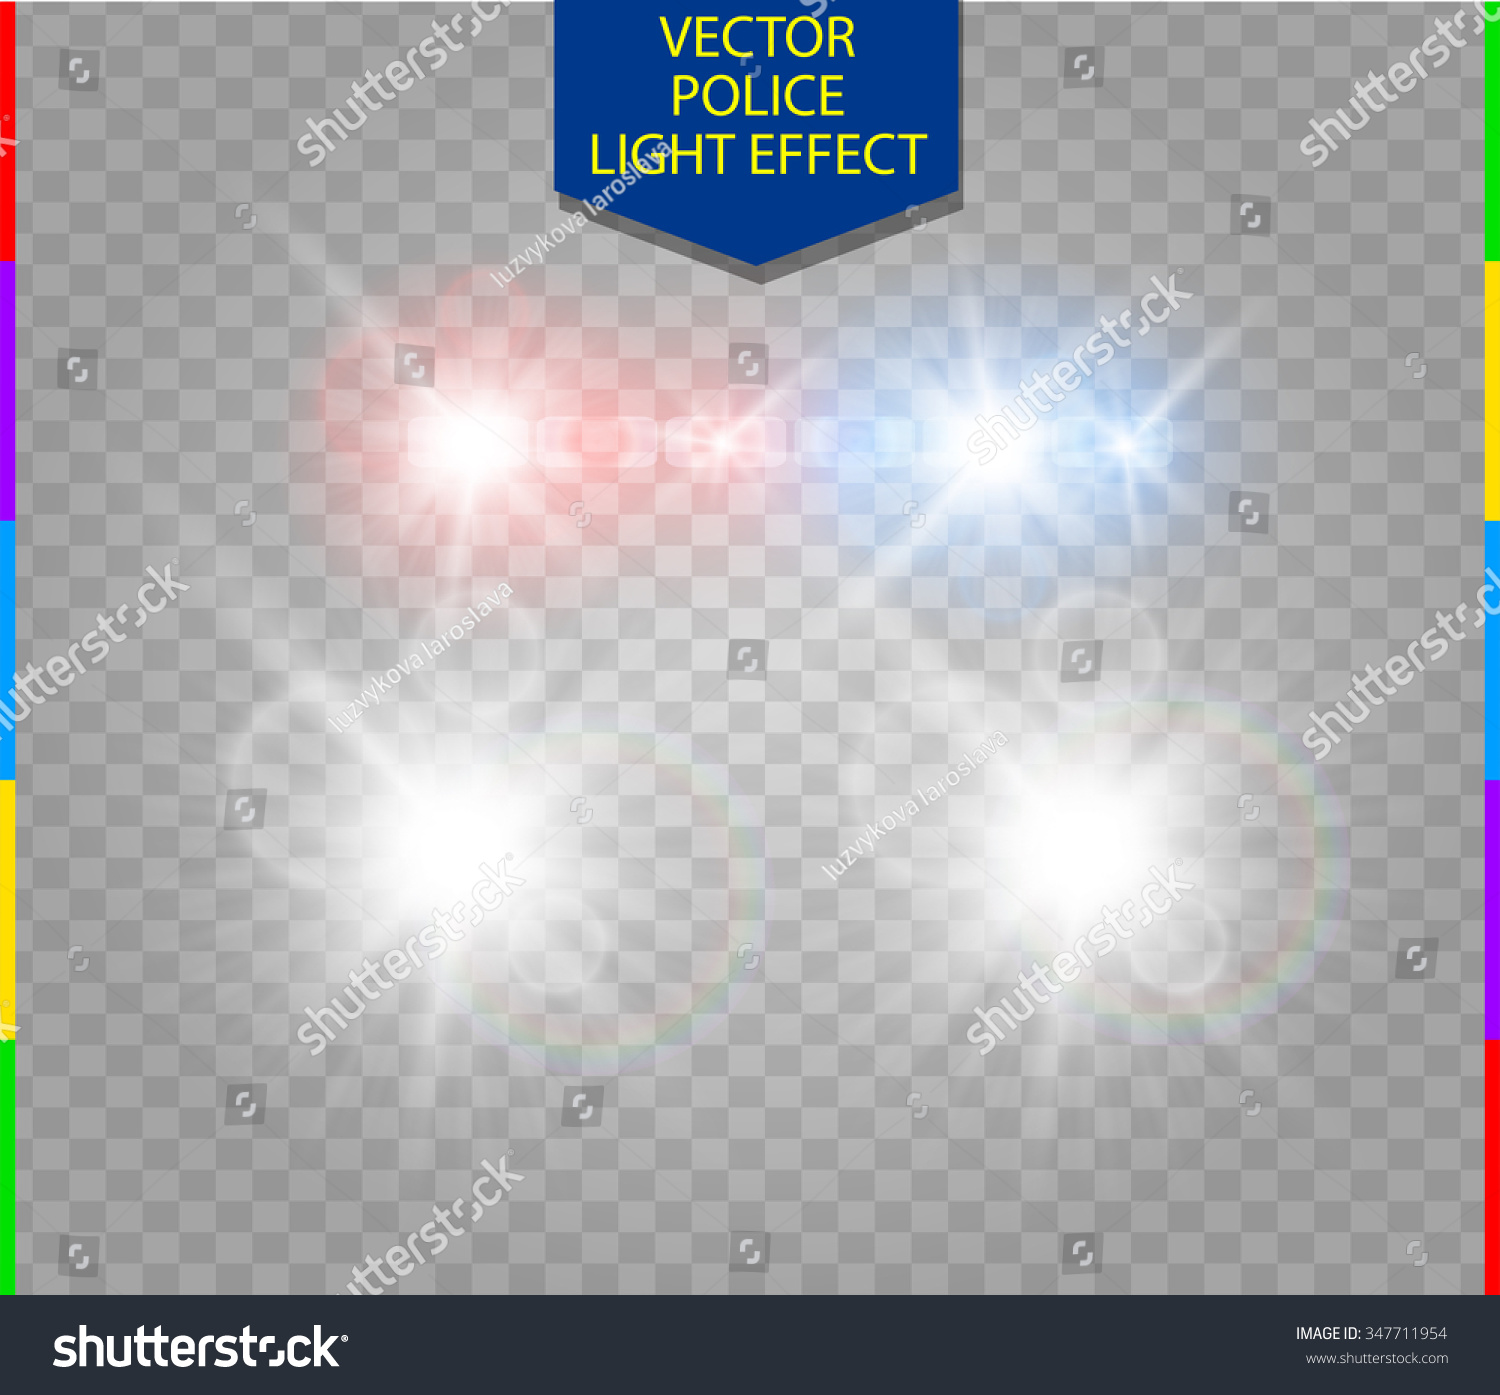 SVG of police car glow special light effect with headlights on transparent background svg